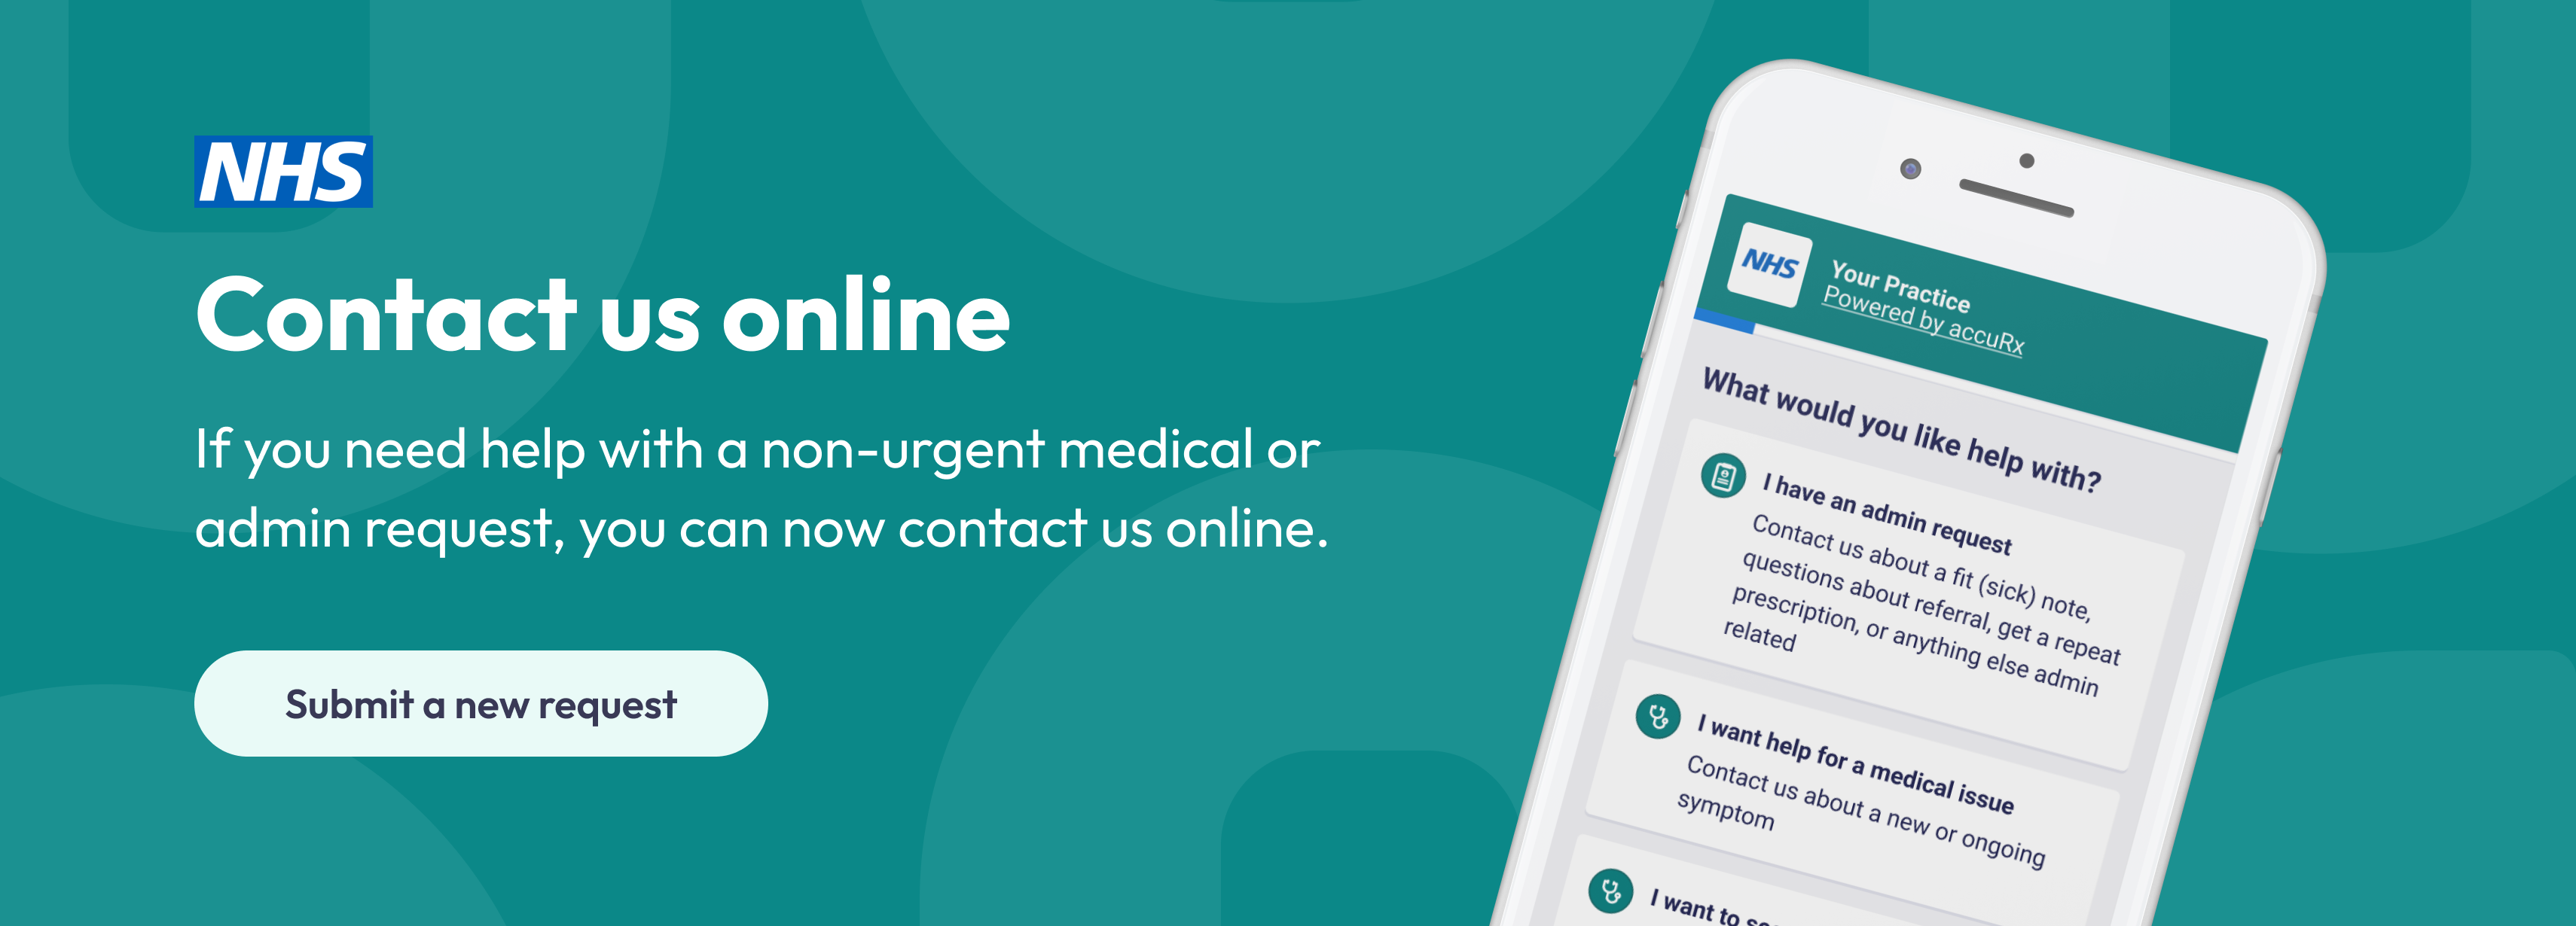 For help with a non-urgent medical or admin request contact us online